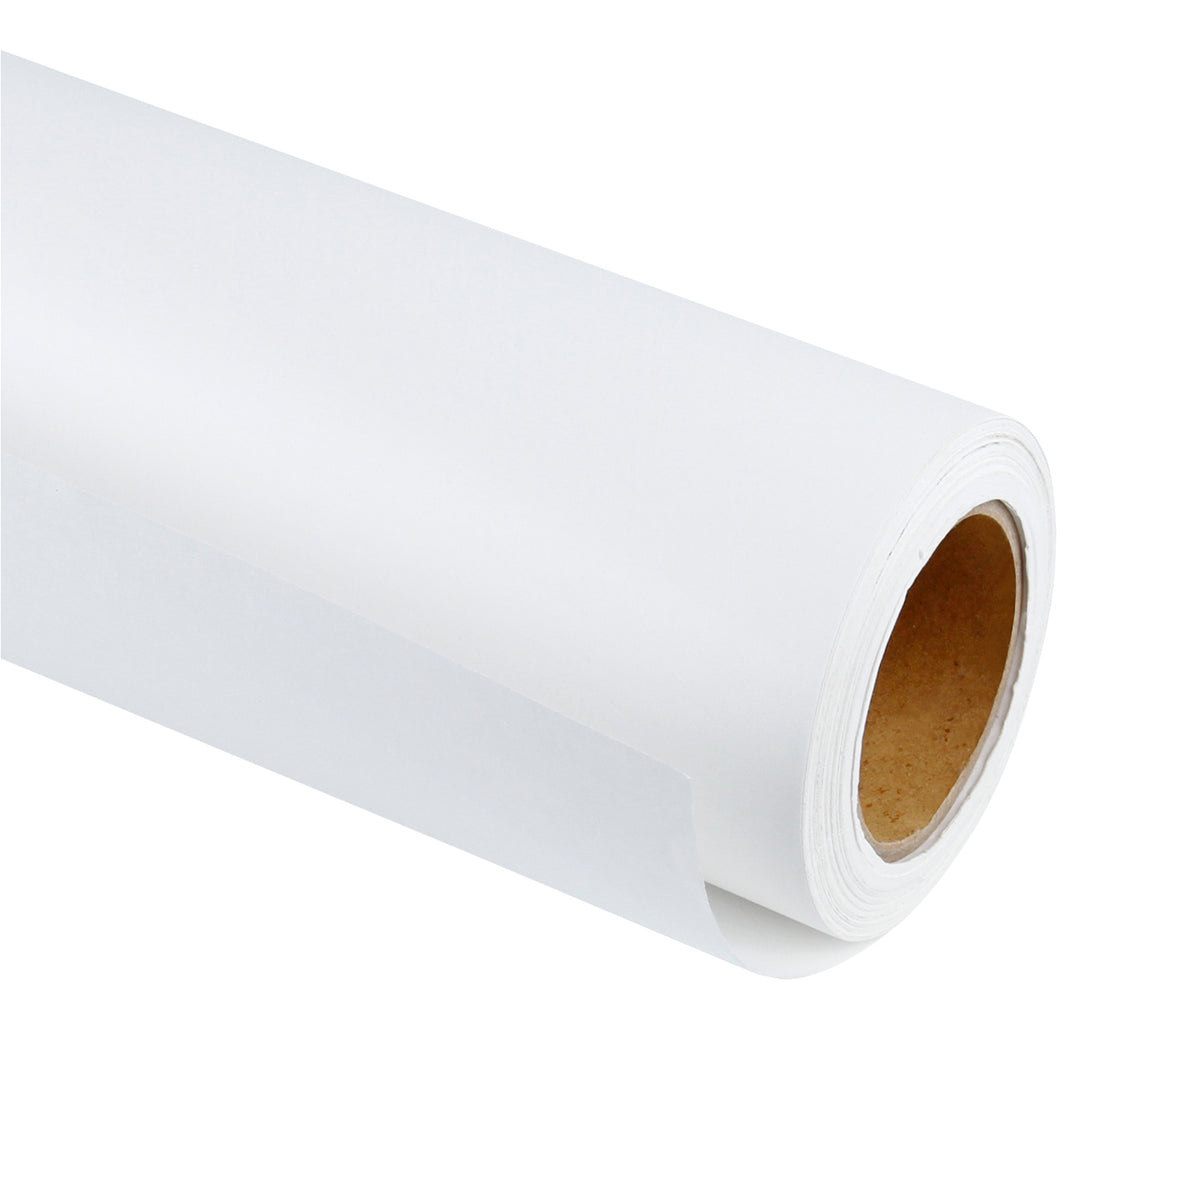 50lb Recycled Kraft Packing Paper, 24 inch x 840' Roll